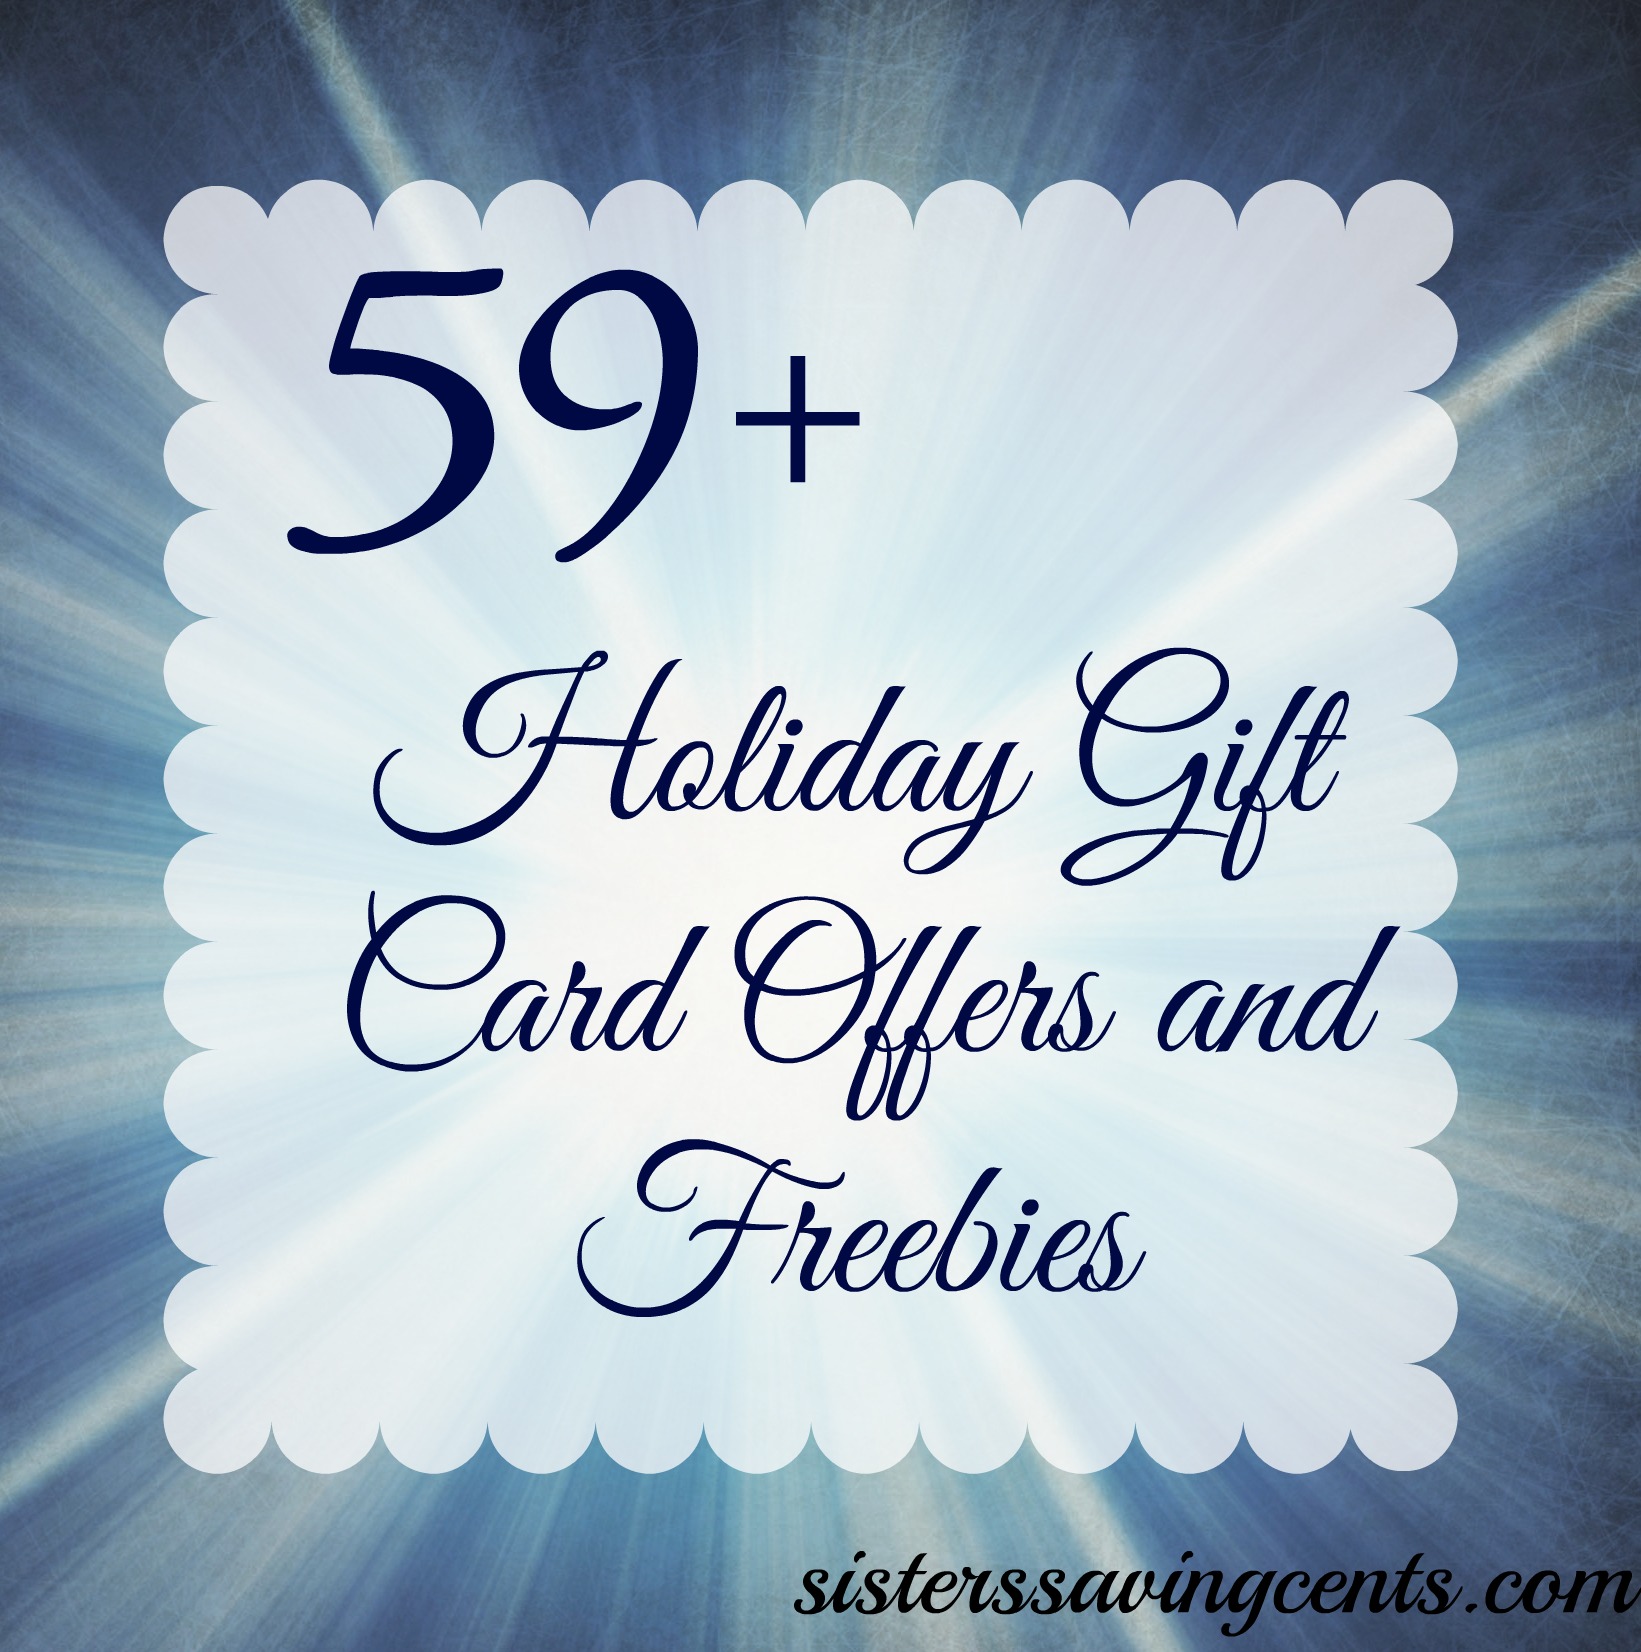 holiday gift card offers